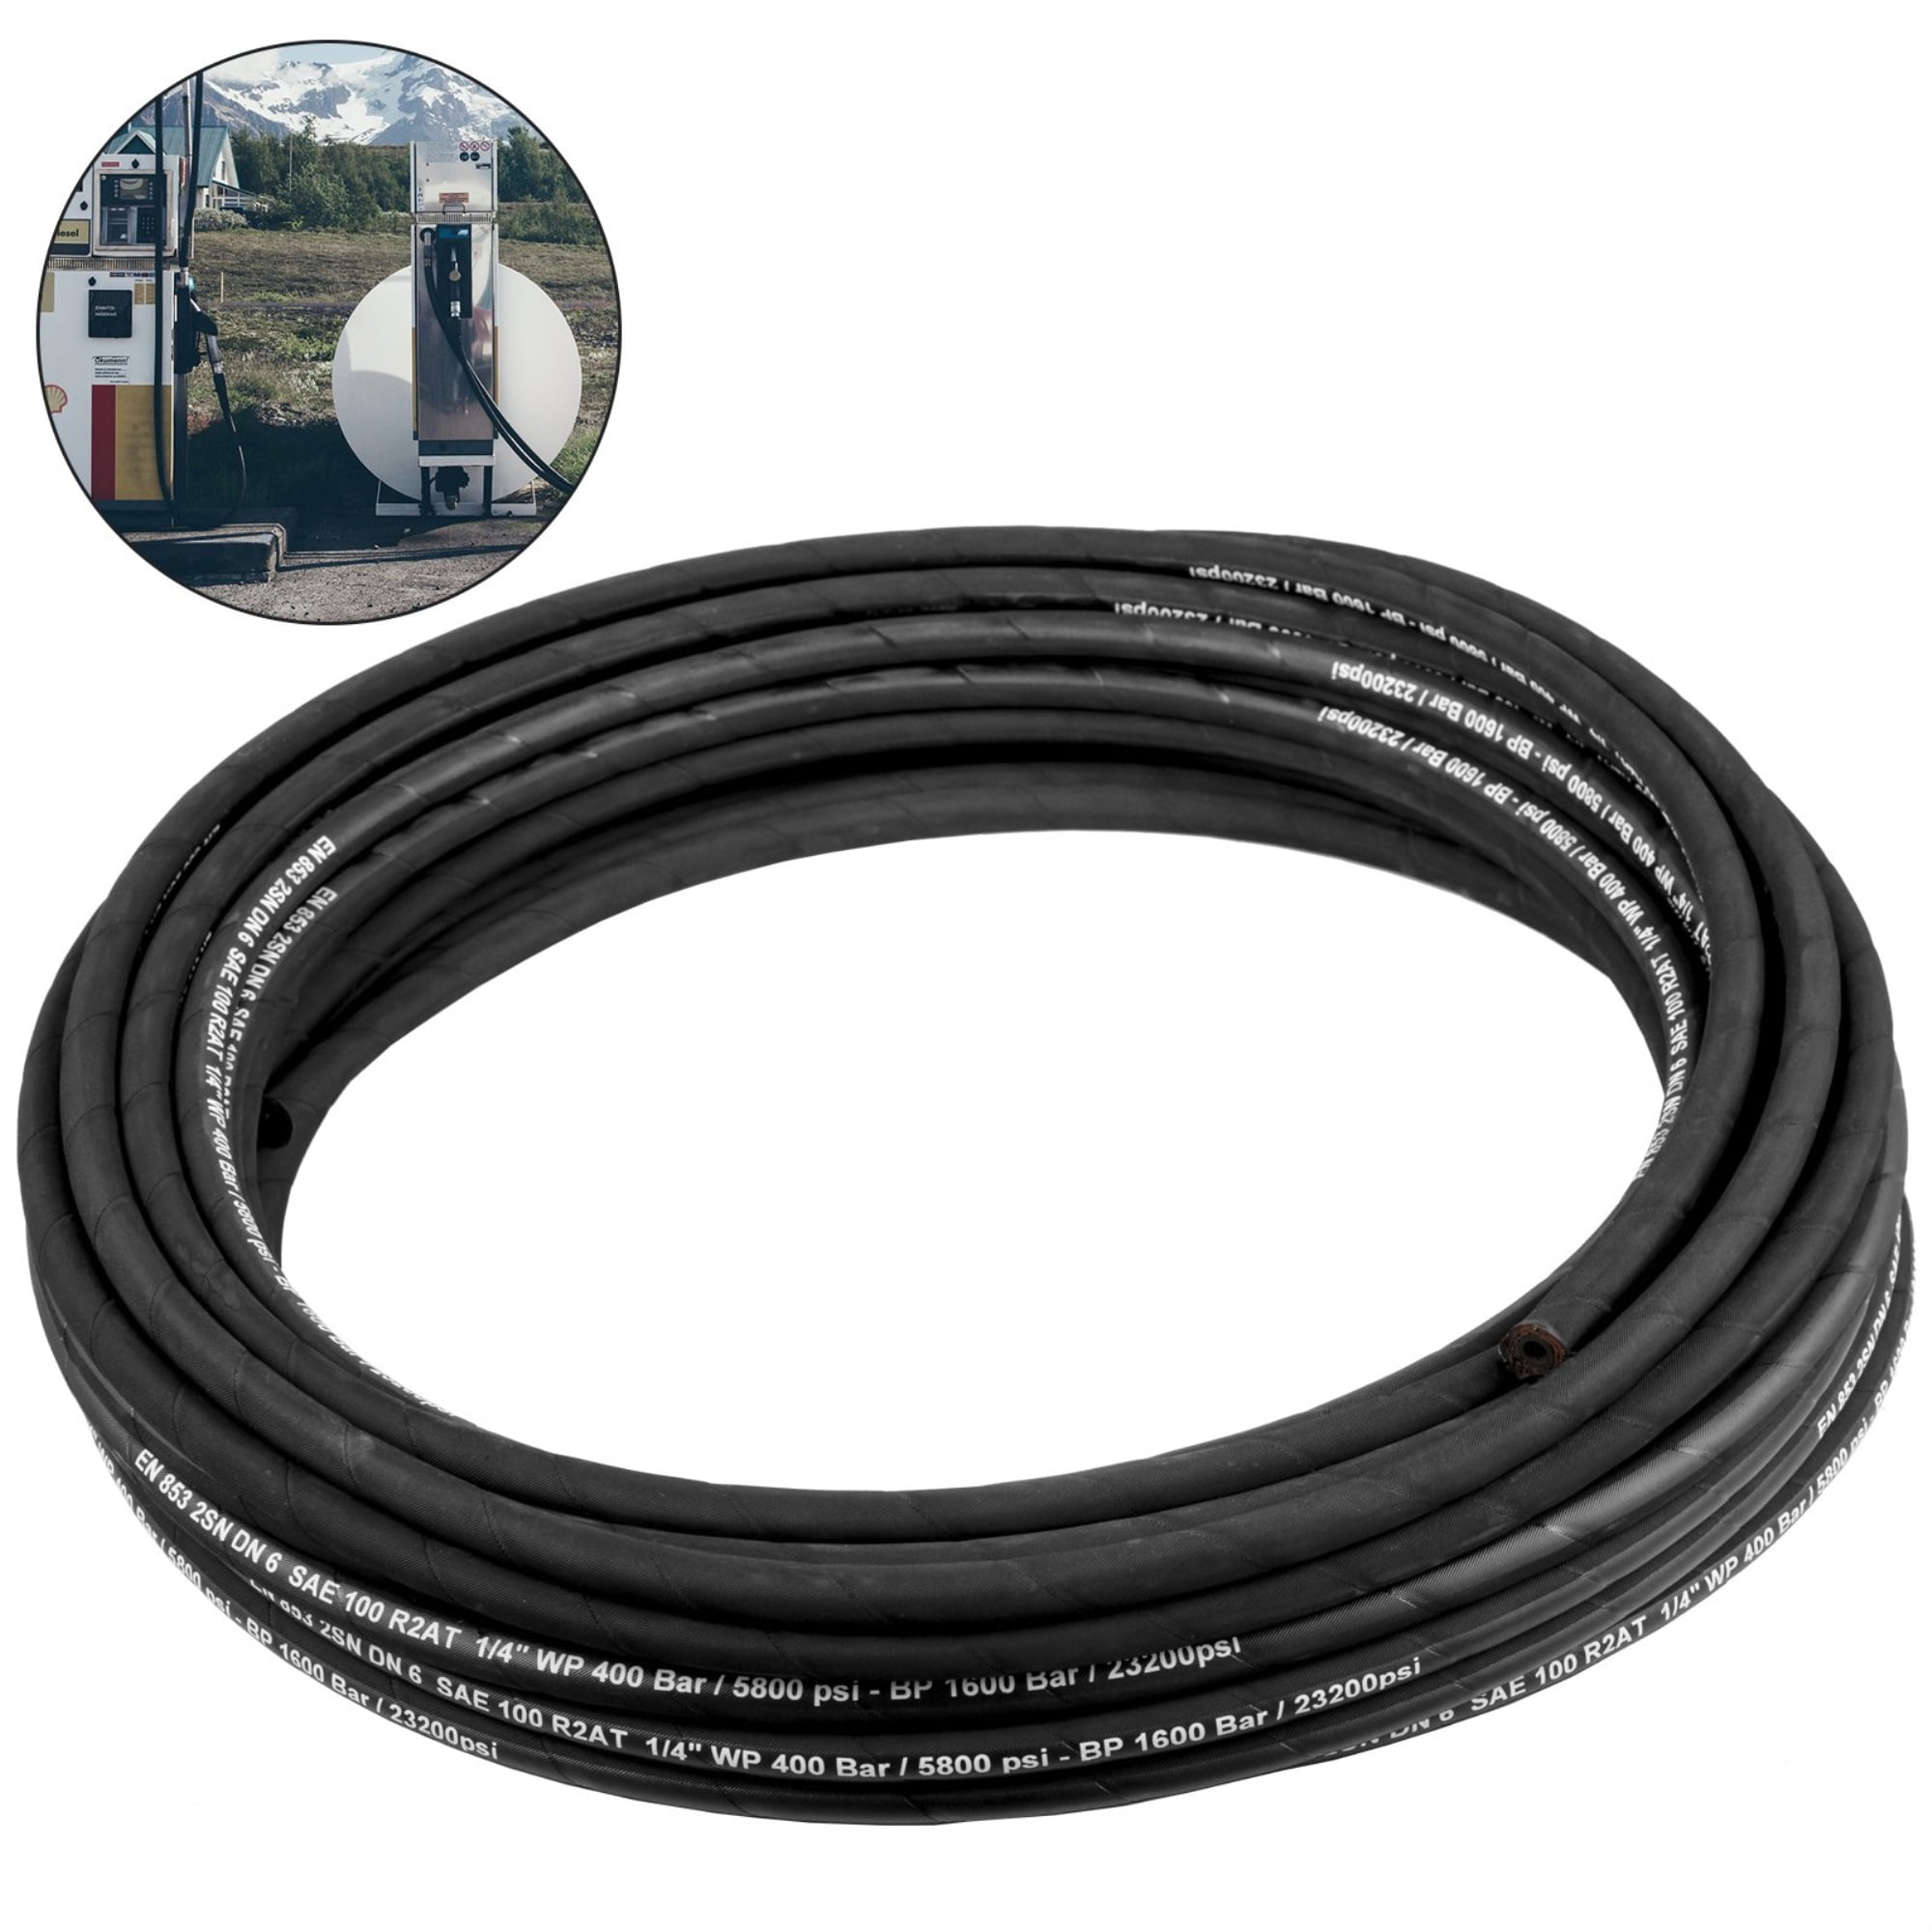 PSI 5800 2 WIRE  FREE SHIP HYDRAULIC HOSE 50 FT R2T04 1/4 SAE W.P 